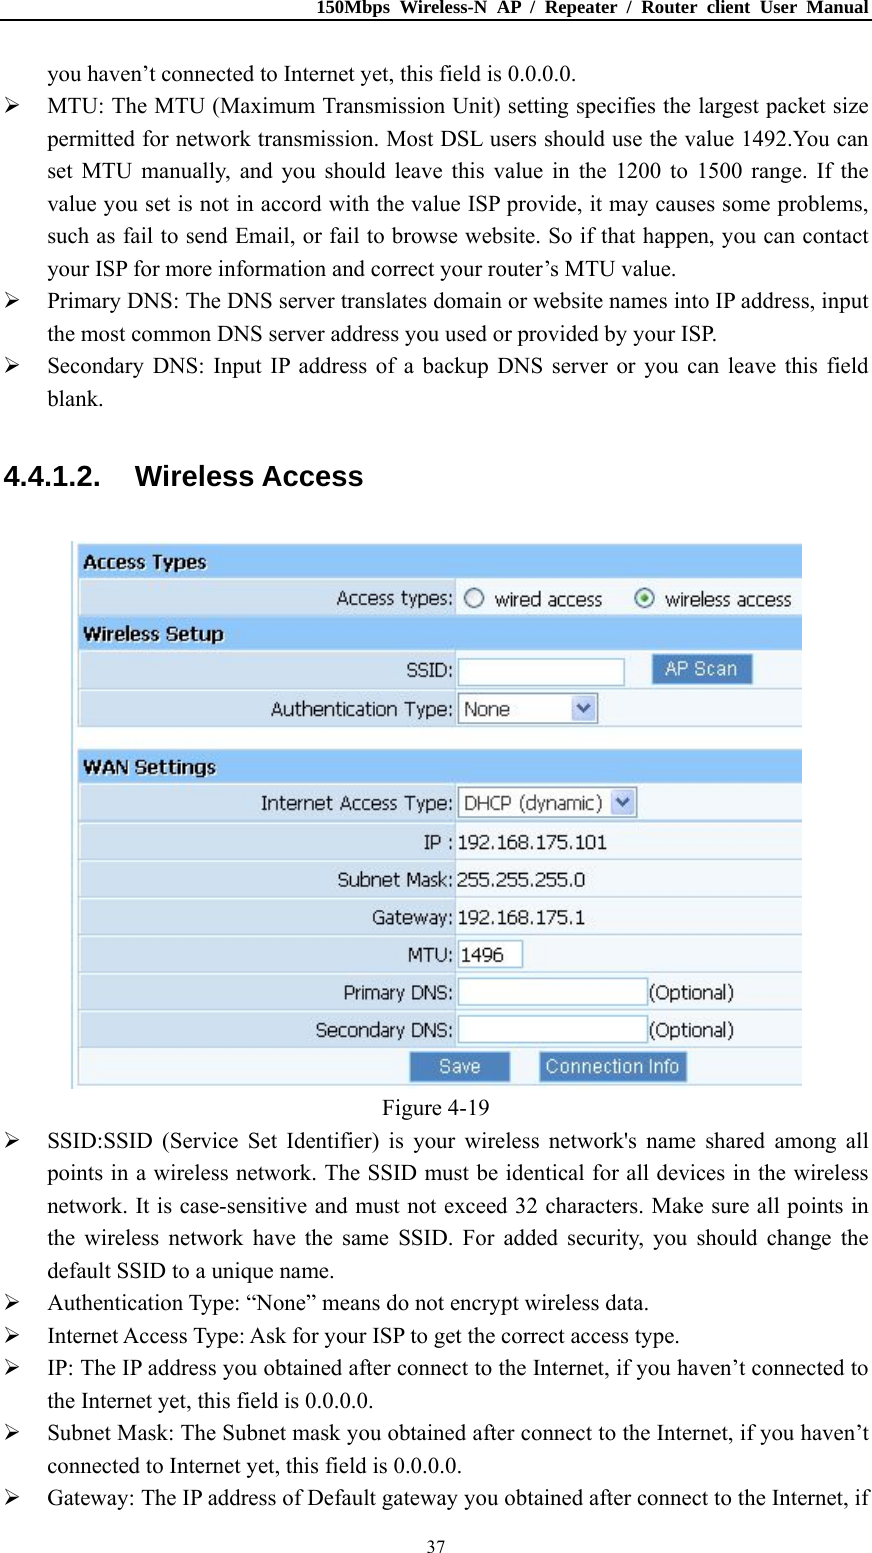 150Mbps Wireless-N AP / Repeater / Router client User Manual  37you haven’t connected to Internet yet, this field is 0.0.0.0.  MTU: The MTU (Maximum Transmission Unit) setting specifies the largest packet size permitted for network transmission. Most DSL users should use the value 1492.You can set MTU manually, and you should leave this value in the 1200 to 1500 range. If the value you set is not in accord with the value ISP provide, it may causes some problems, such as fail to send Email, or fail to browse website. So if that happen, you can contact your ISP for more information and correct your router’s MTU value.  Primary DNS: The DNS server translates domain or website names into IP address, input the most common DNS server address you used or provided by your ISP.  Secondary DNS: Input IP address of a backup DNS server or you can leave this field blank. 4.4.1.2. Wireless Access  Figure 4-19  SSID:SSID (Service Set Identifier) is your wireless network&apos;s name shared among all points in a wireless network. The SSID must be identical for all devices in the wireless network. It is case-sensitive and must not exceed 32 characters. Make sure all points in the wireless network have the same SSID. For added security, you should change the default SSID to a unique name.  Authentication Type: “None” means do not encrypt wireless data.  Internet Access Type: Ask for your ISP to get the correct access type.  IP: The IP address you obtained after connect to the Internet, if you haven’t connected to the Internet yet, this field is 0.0.0.0.  Subnet Mask: The Subnet mask you obtained after connect to the Internet, if you haven’t connected to Internet yet, this field is 0.0.0.0.  Gateway: The IP address of Default gateway you obtained after connect to the Internet, if 